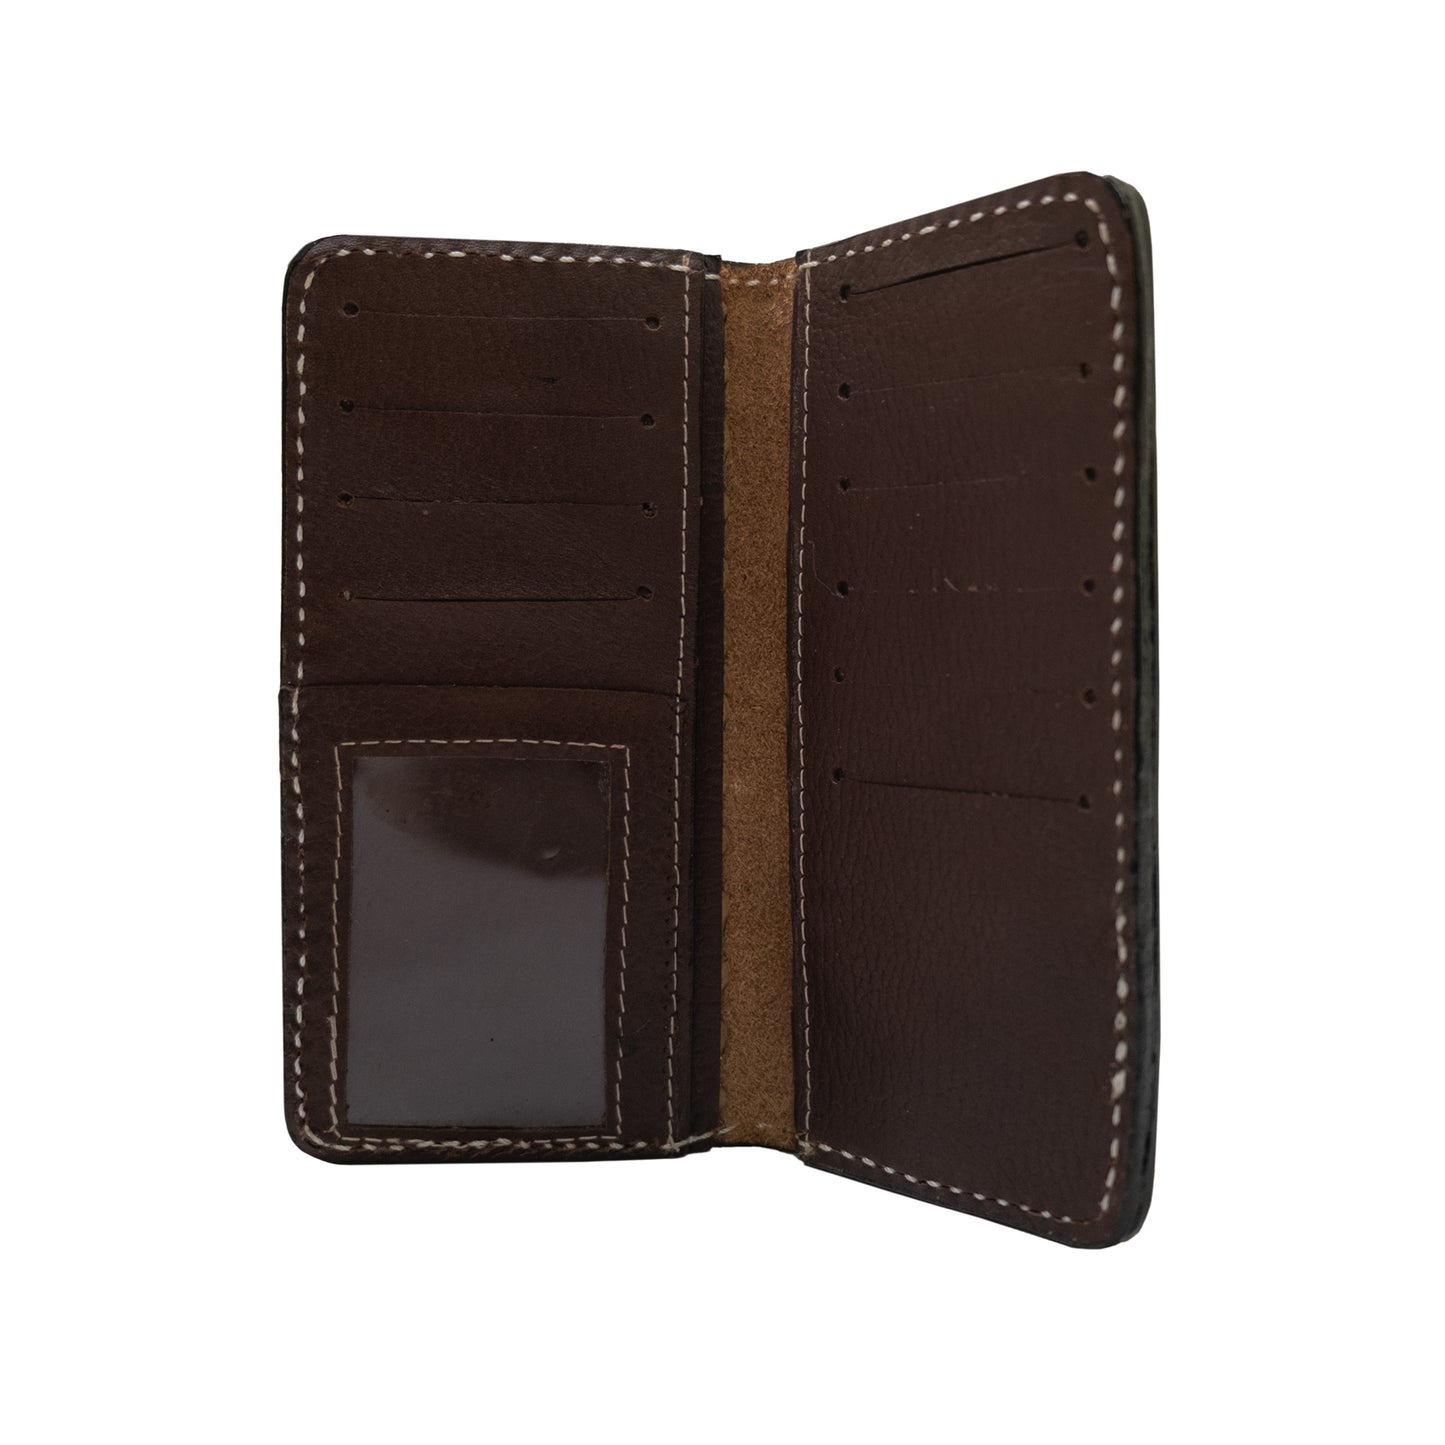 Tall wallet rough out chocolate leather with buckstitch